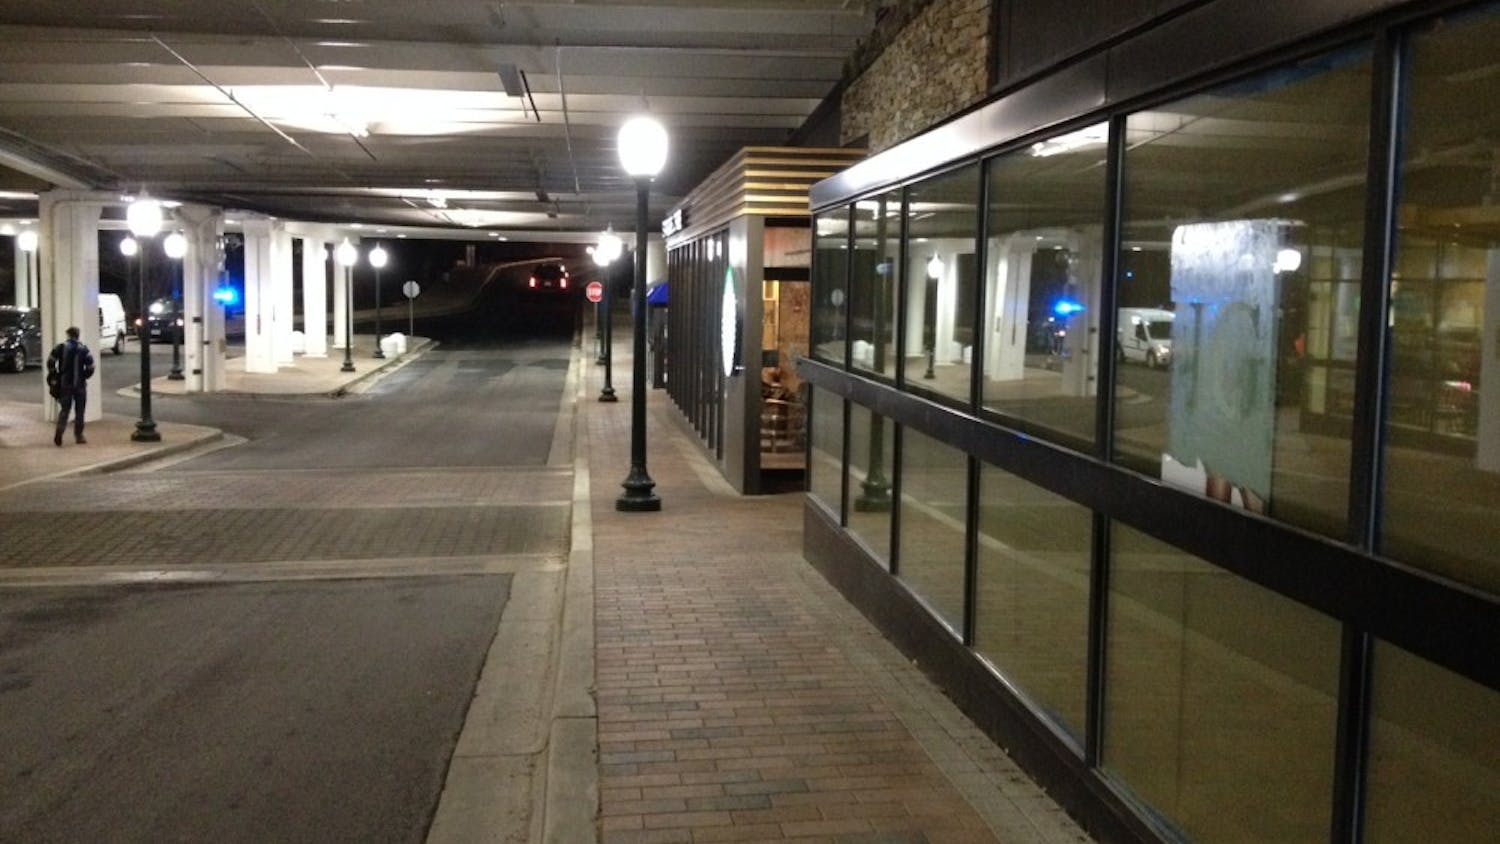 Subway will move into the empty space in the tunnel formerly occupied by TIGI Salon.